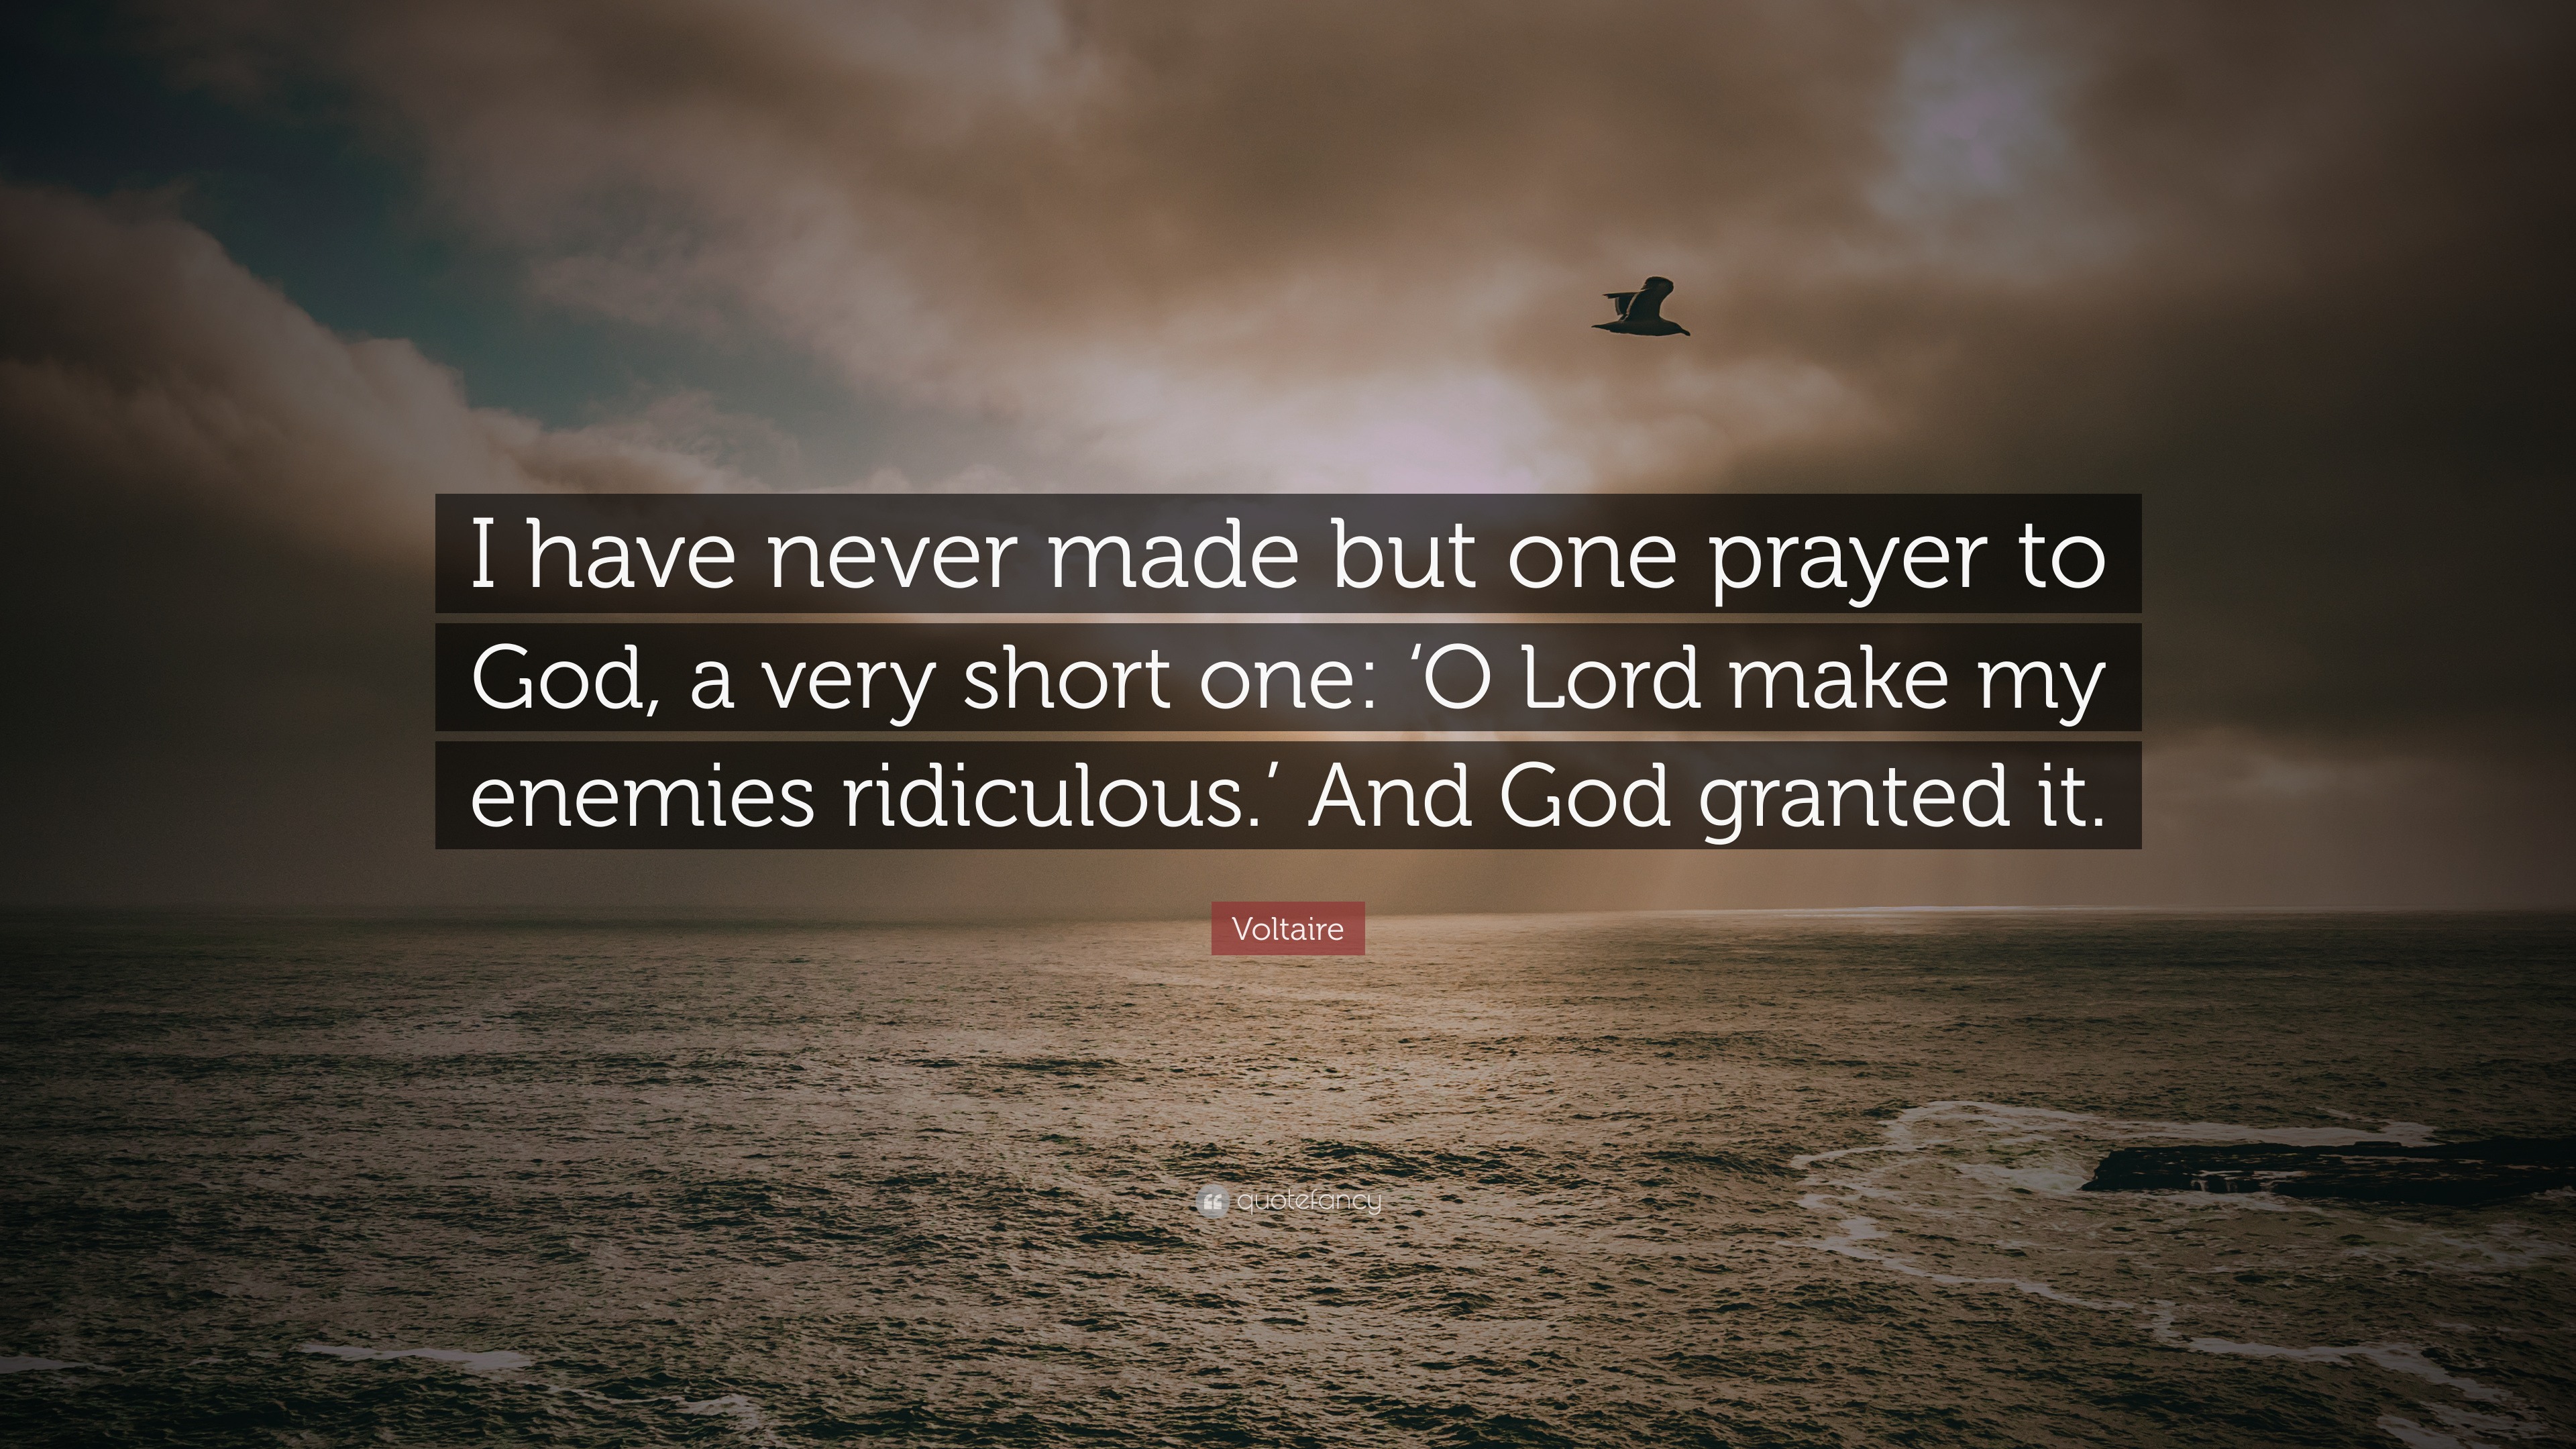 2110139-Voltaire-Quote-I-have-never-made-but-one-prayer-to-God-a-very.jpg 